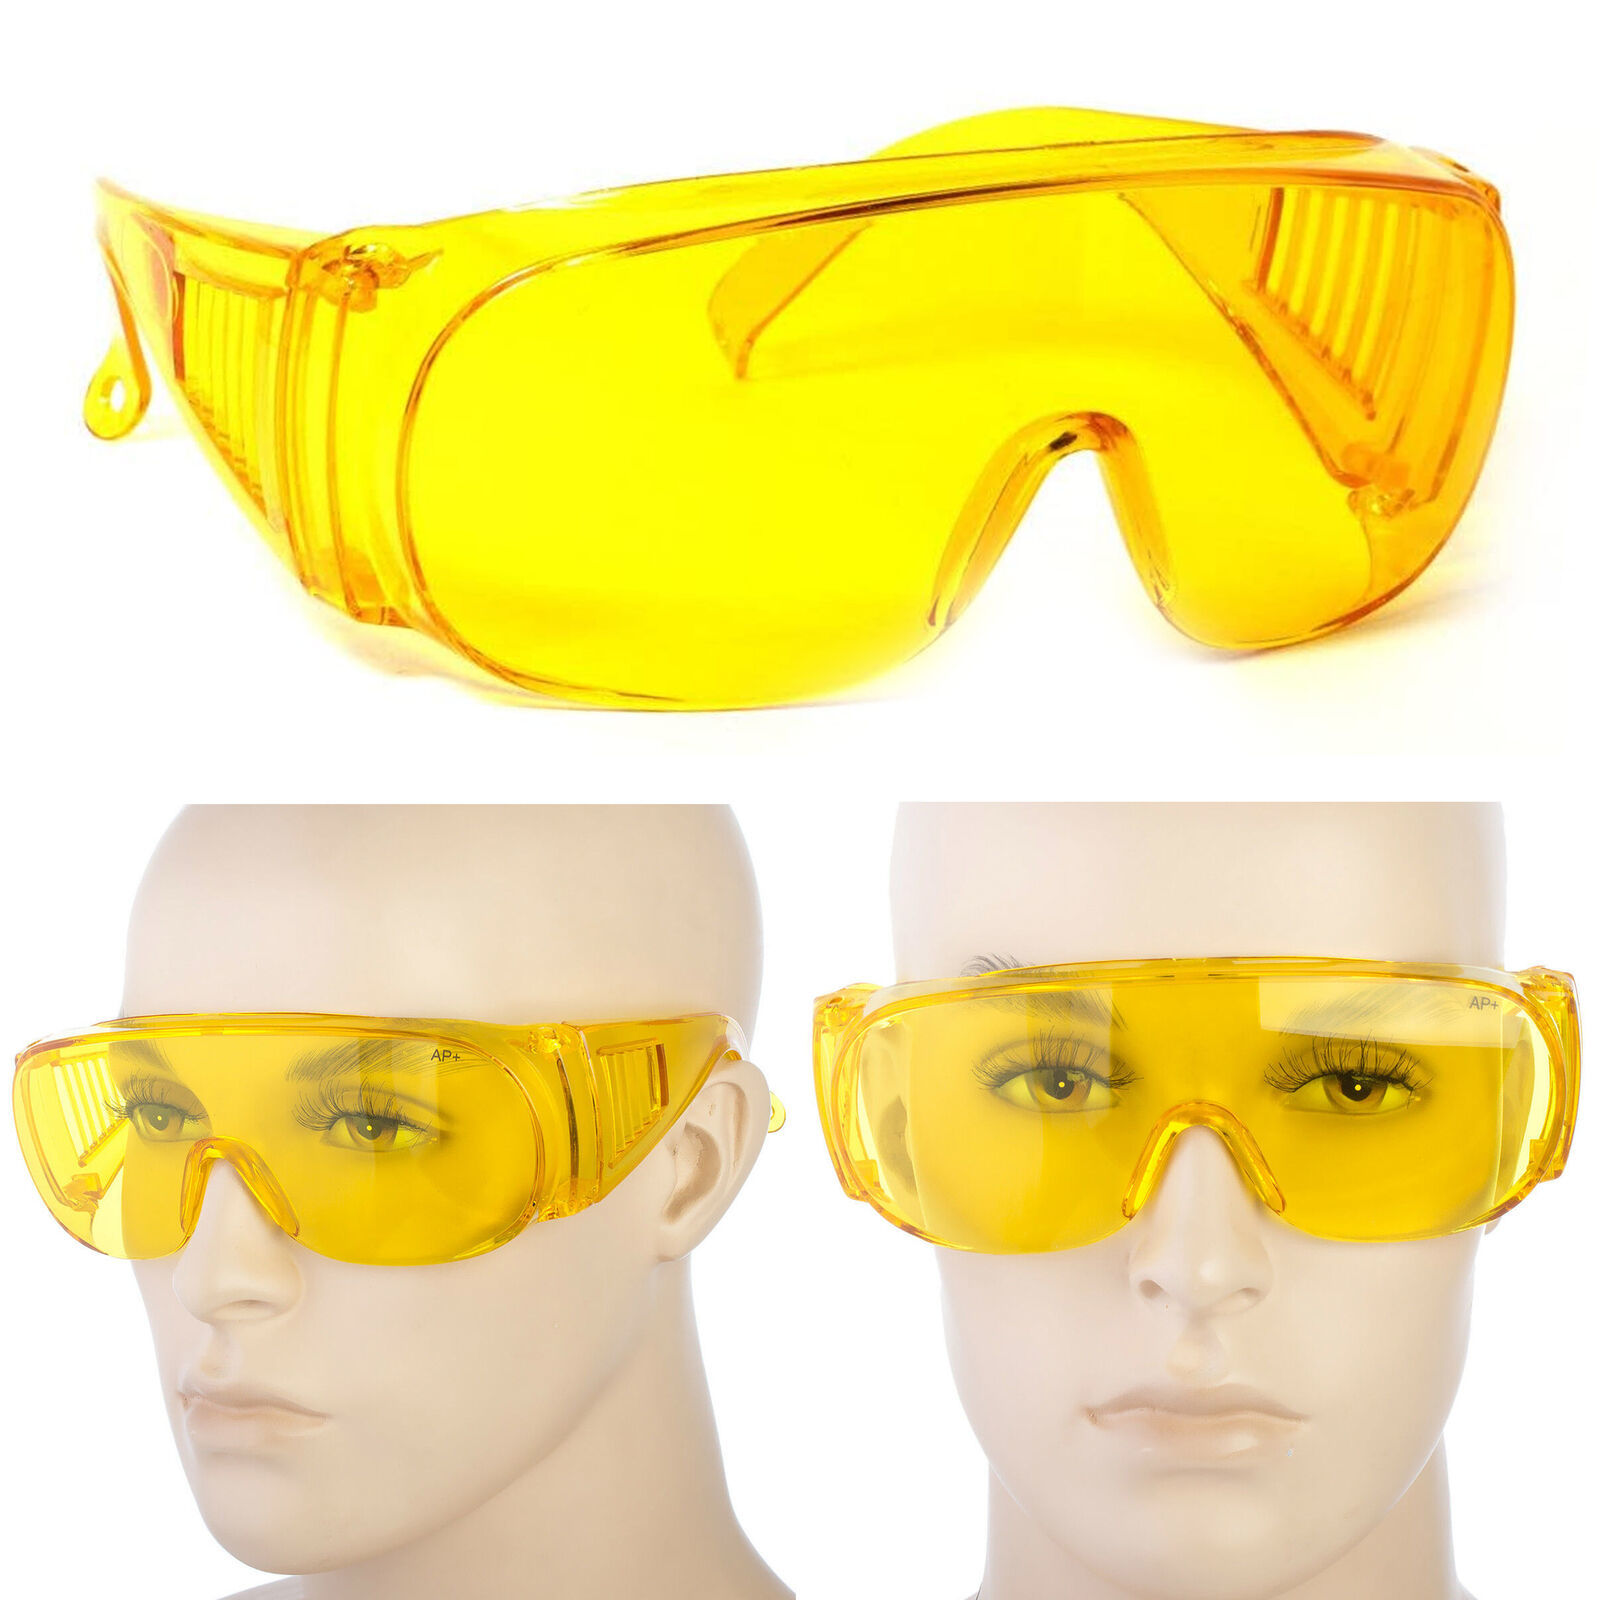 Primary image for 1 Pair Sunglasses Fit Over Frame Cover Glasses Drive Lens Safety Large Yellow